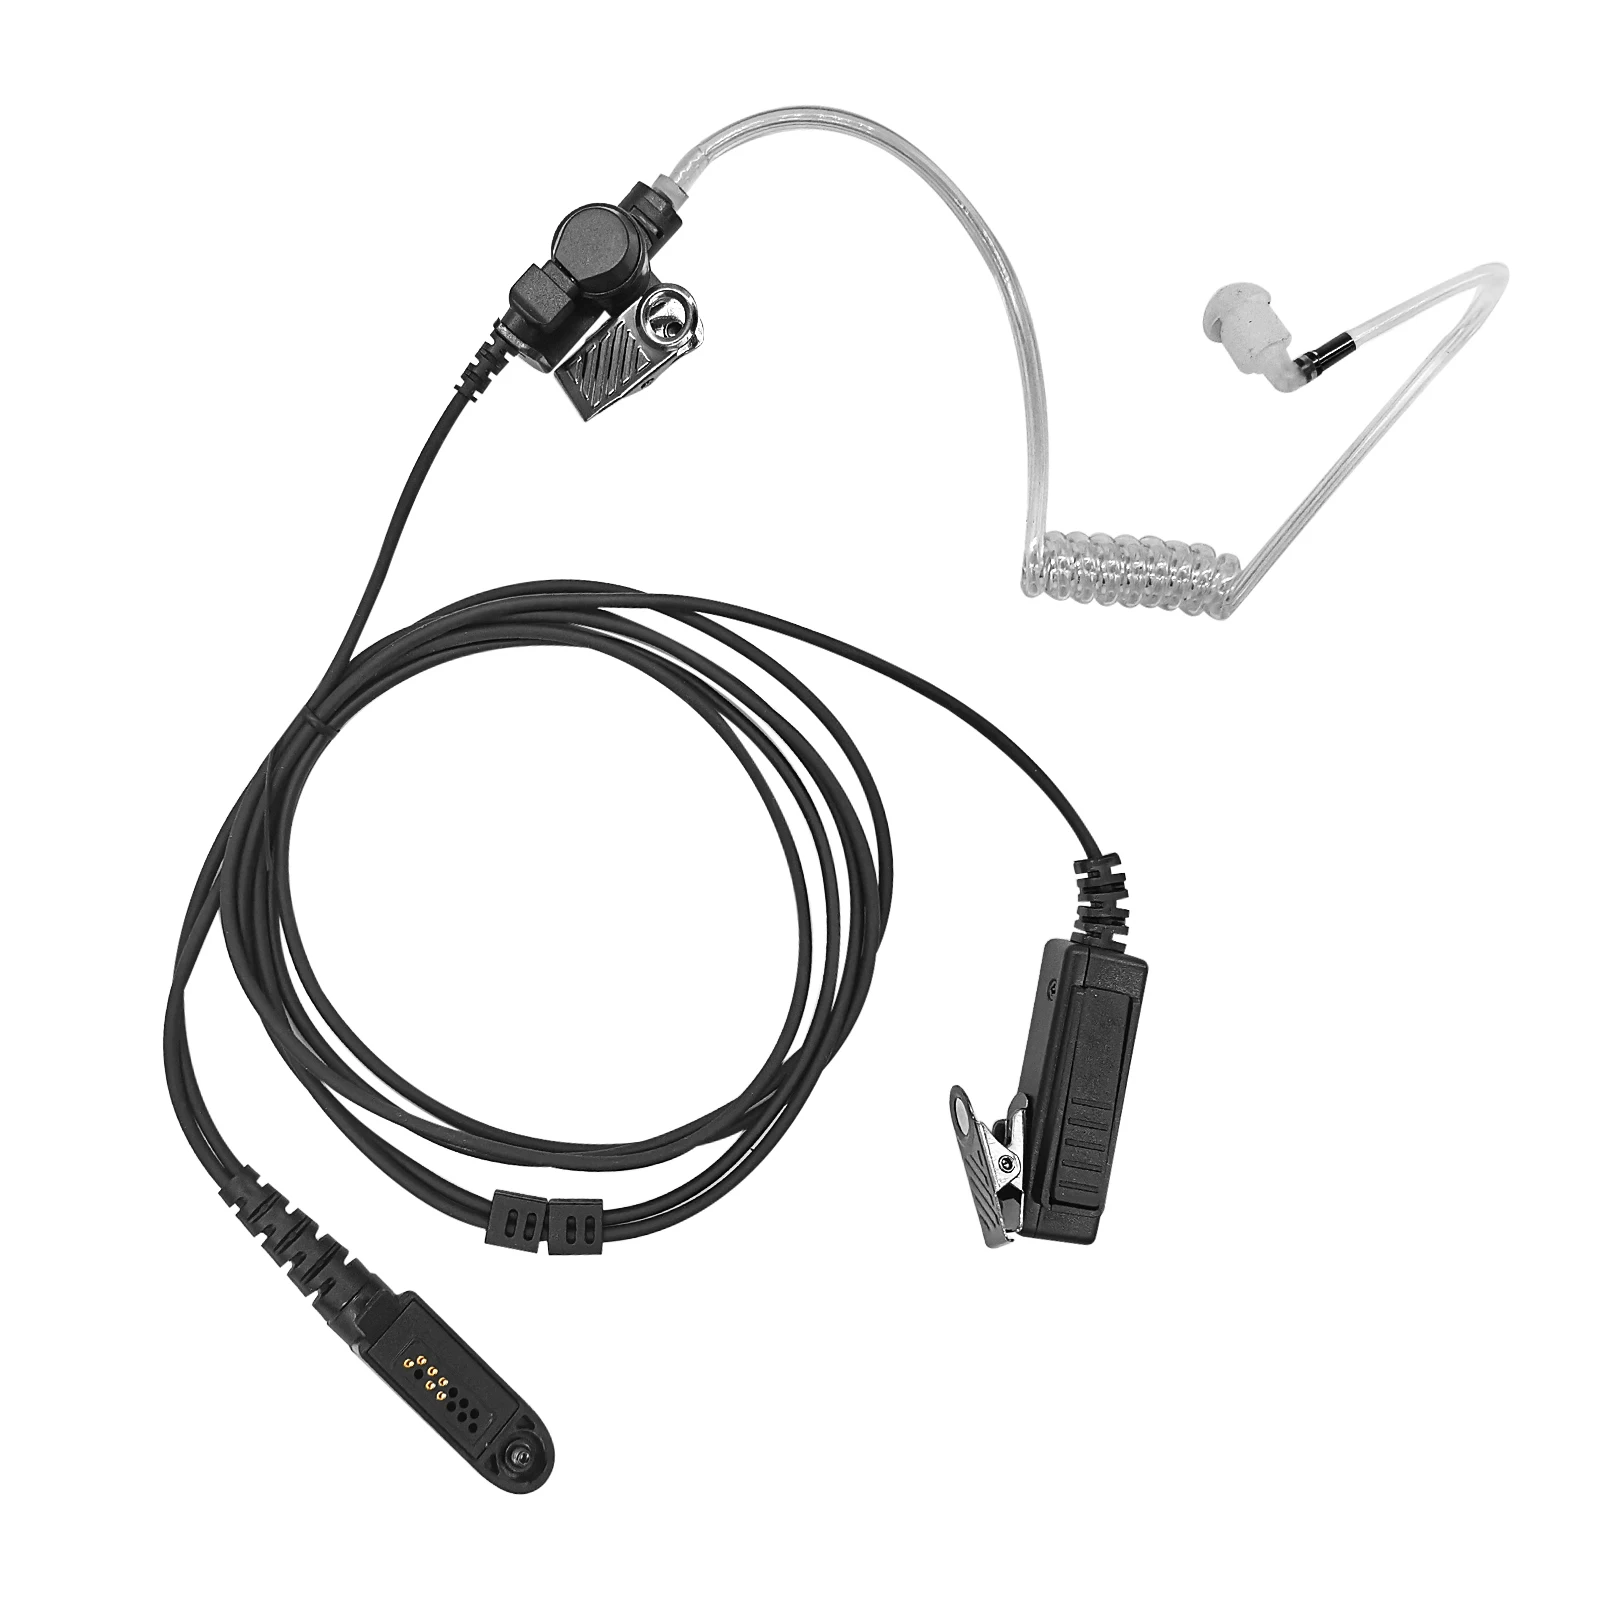 Acoustic Tube Surveillance Earpiece Headset with PTT, 2 Wire Air Covert, for Motorola Radio